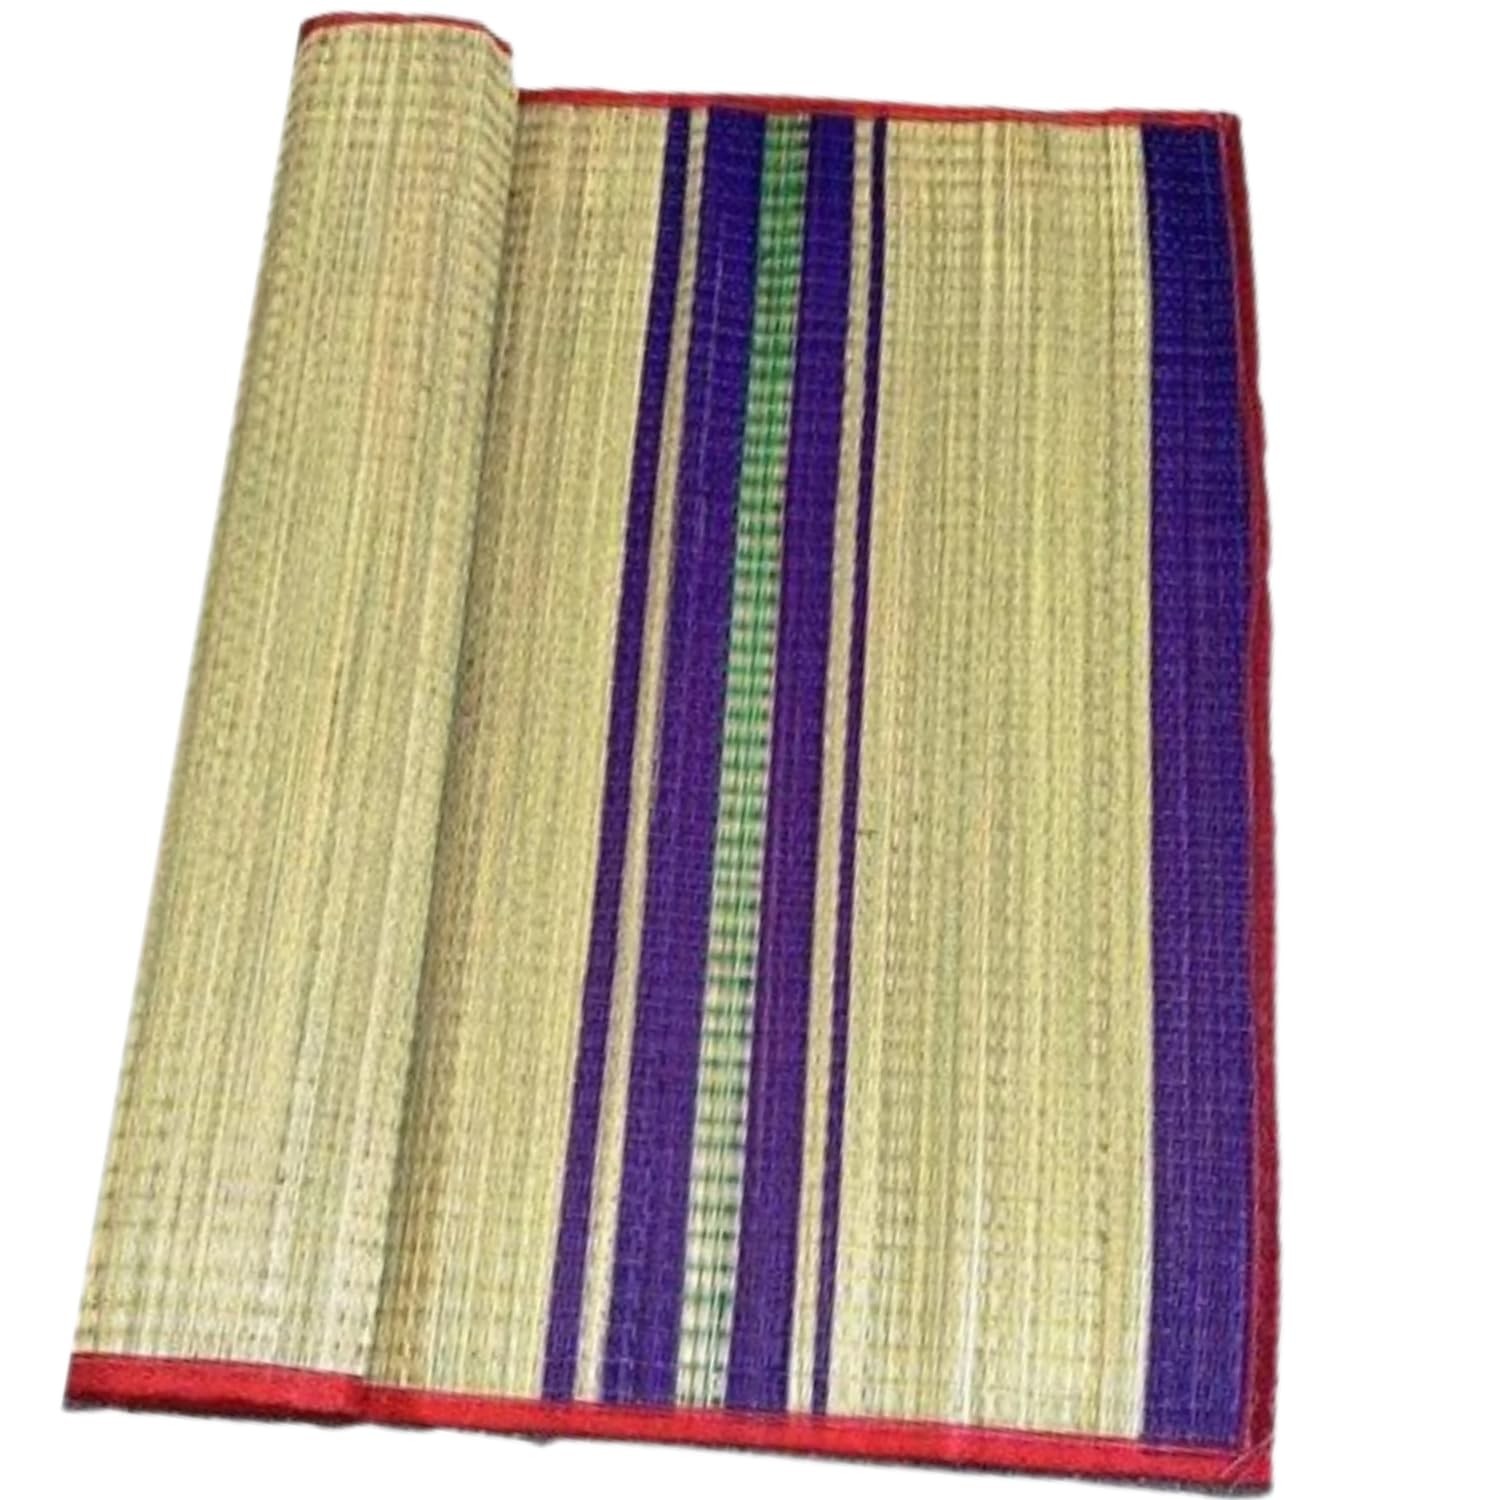 Foldable Korai Mat for Comfortable Sleeping | Natural Grass Chatai Mat 6x3ft | Traditional Handwoven Eco-Friendly Mat for Home and Travel